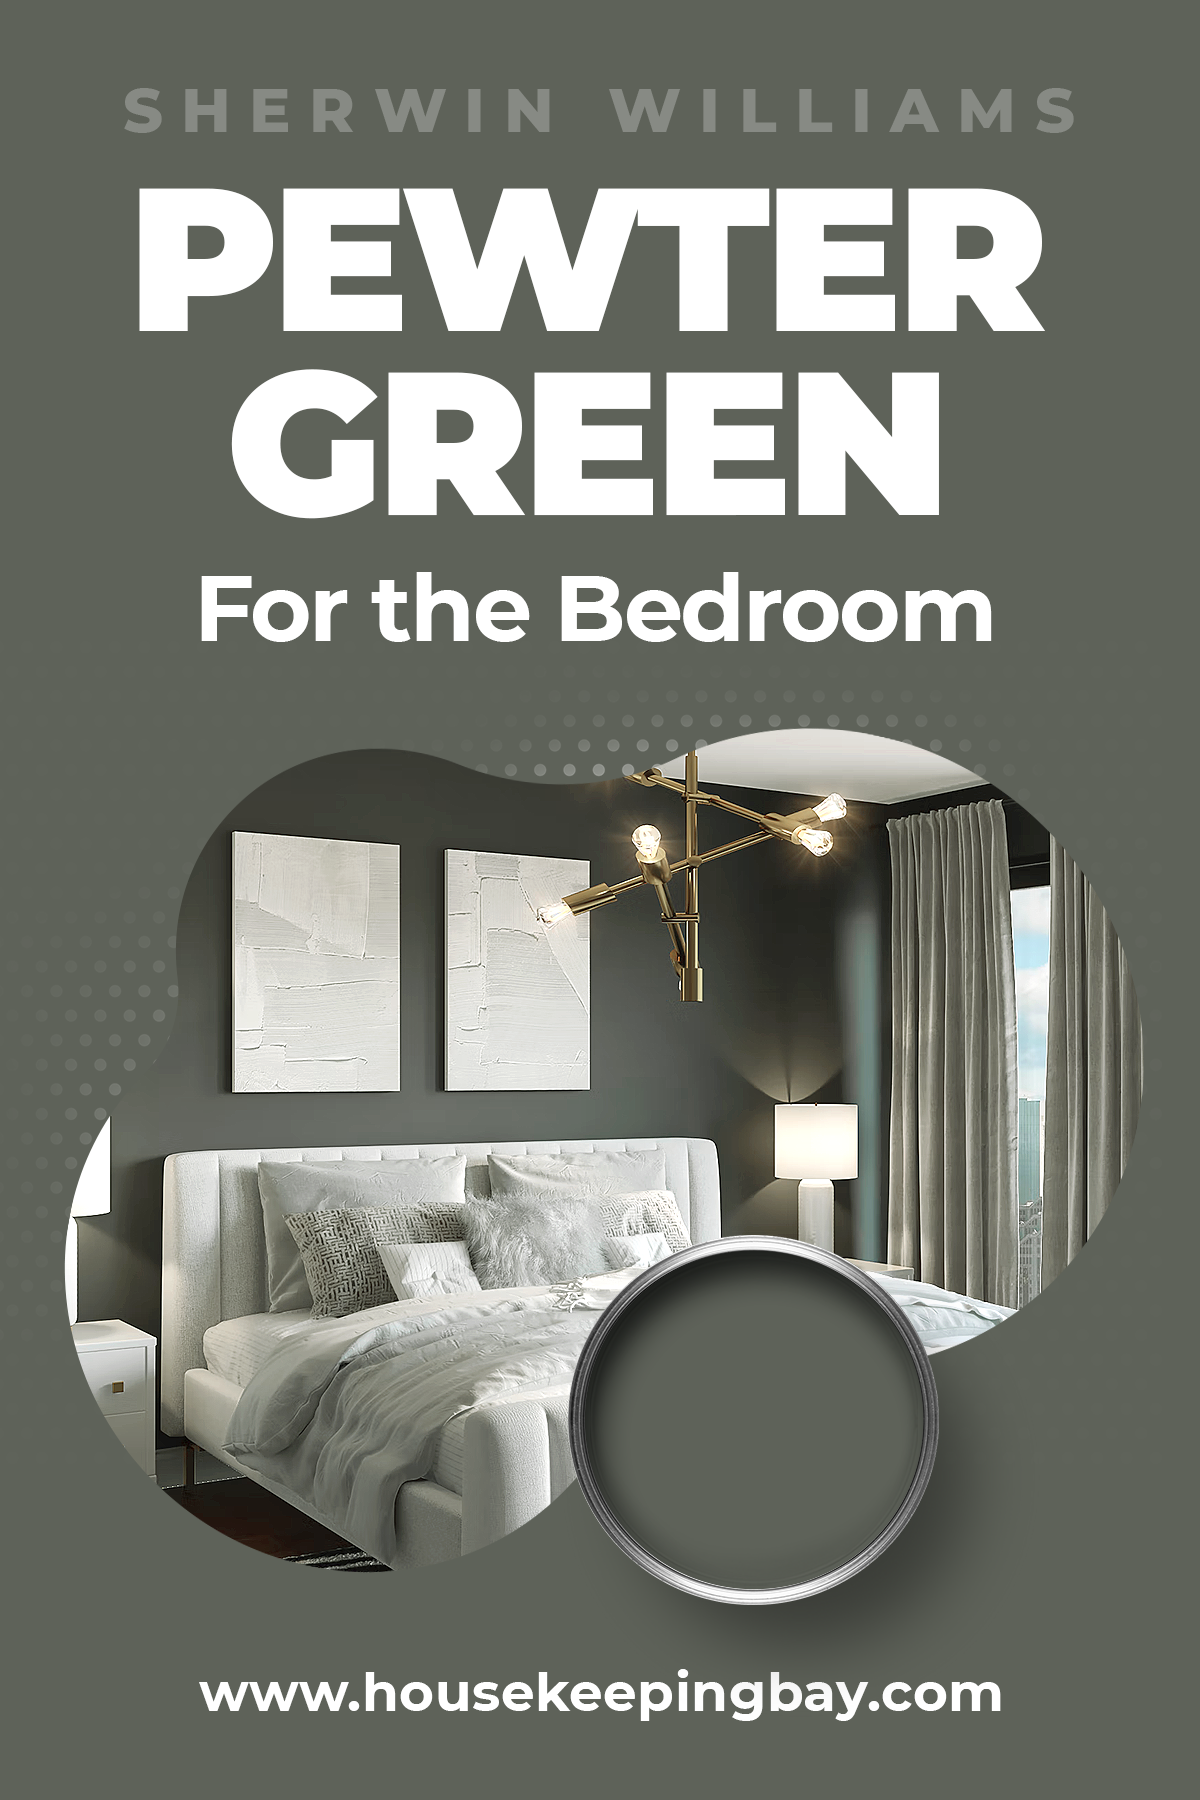 Sherwin Williams Pewter Green for the bedroom